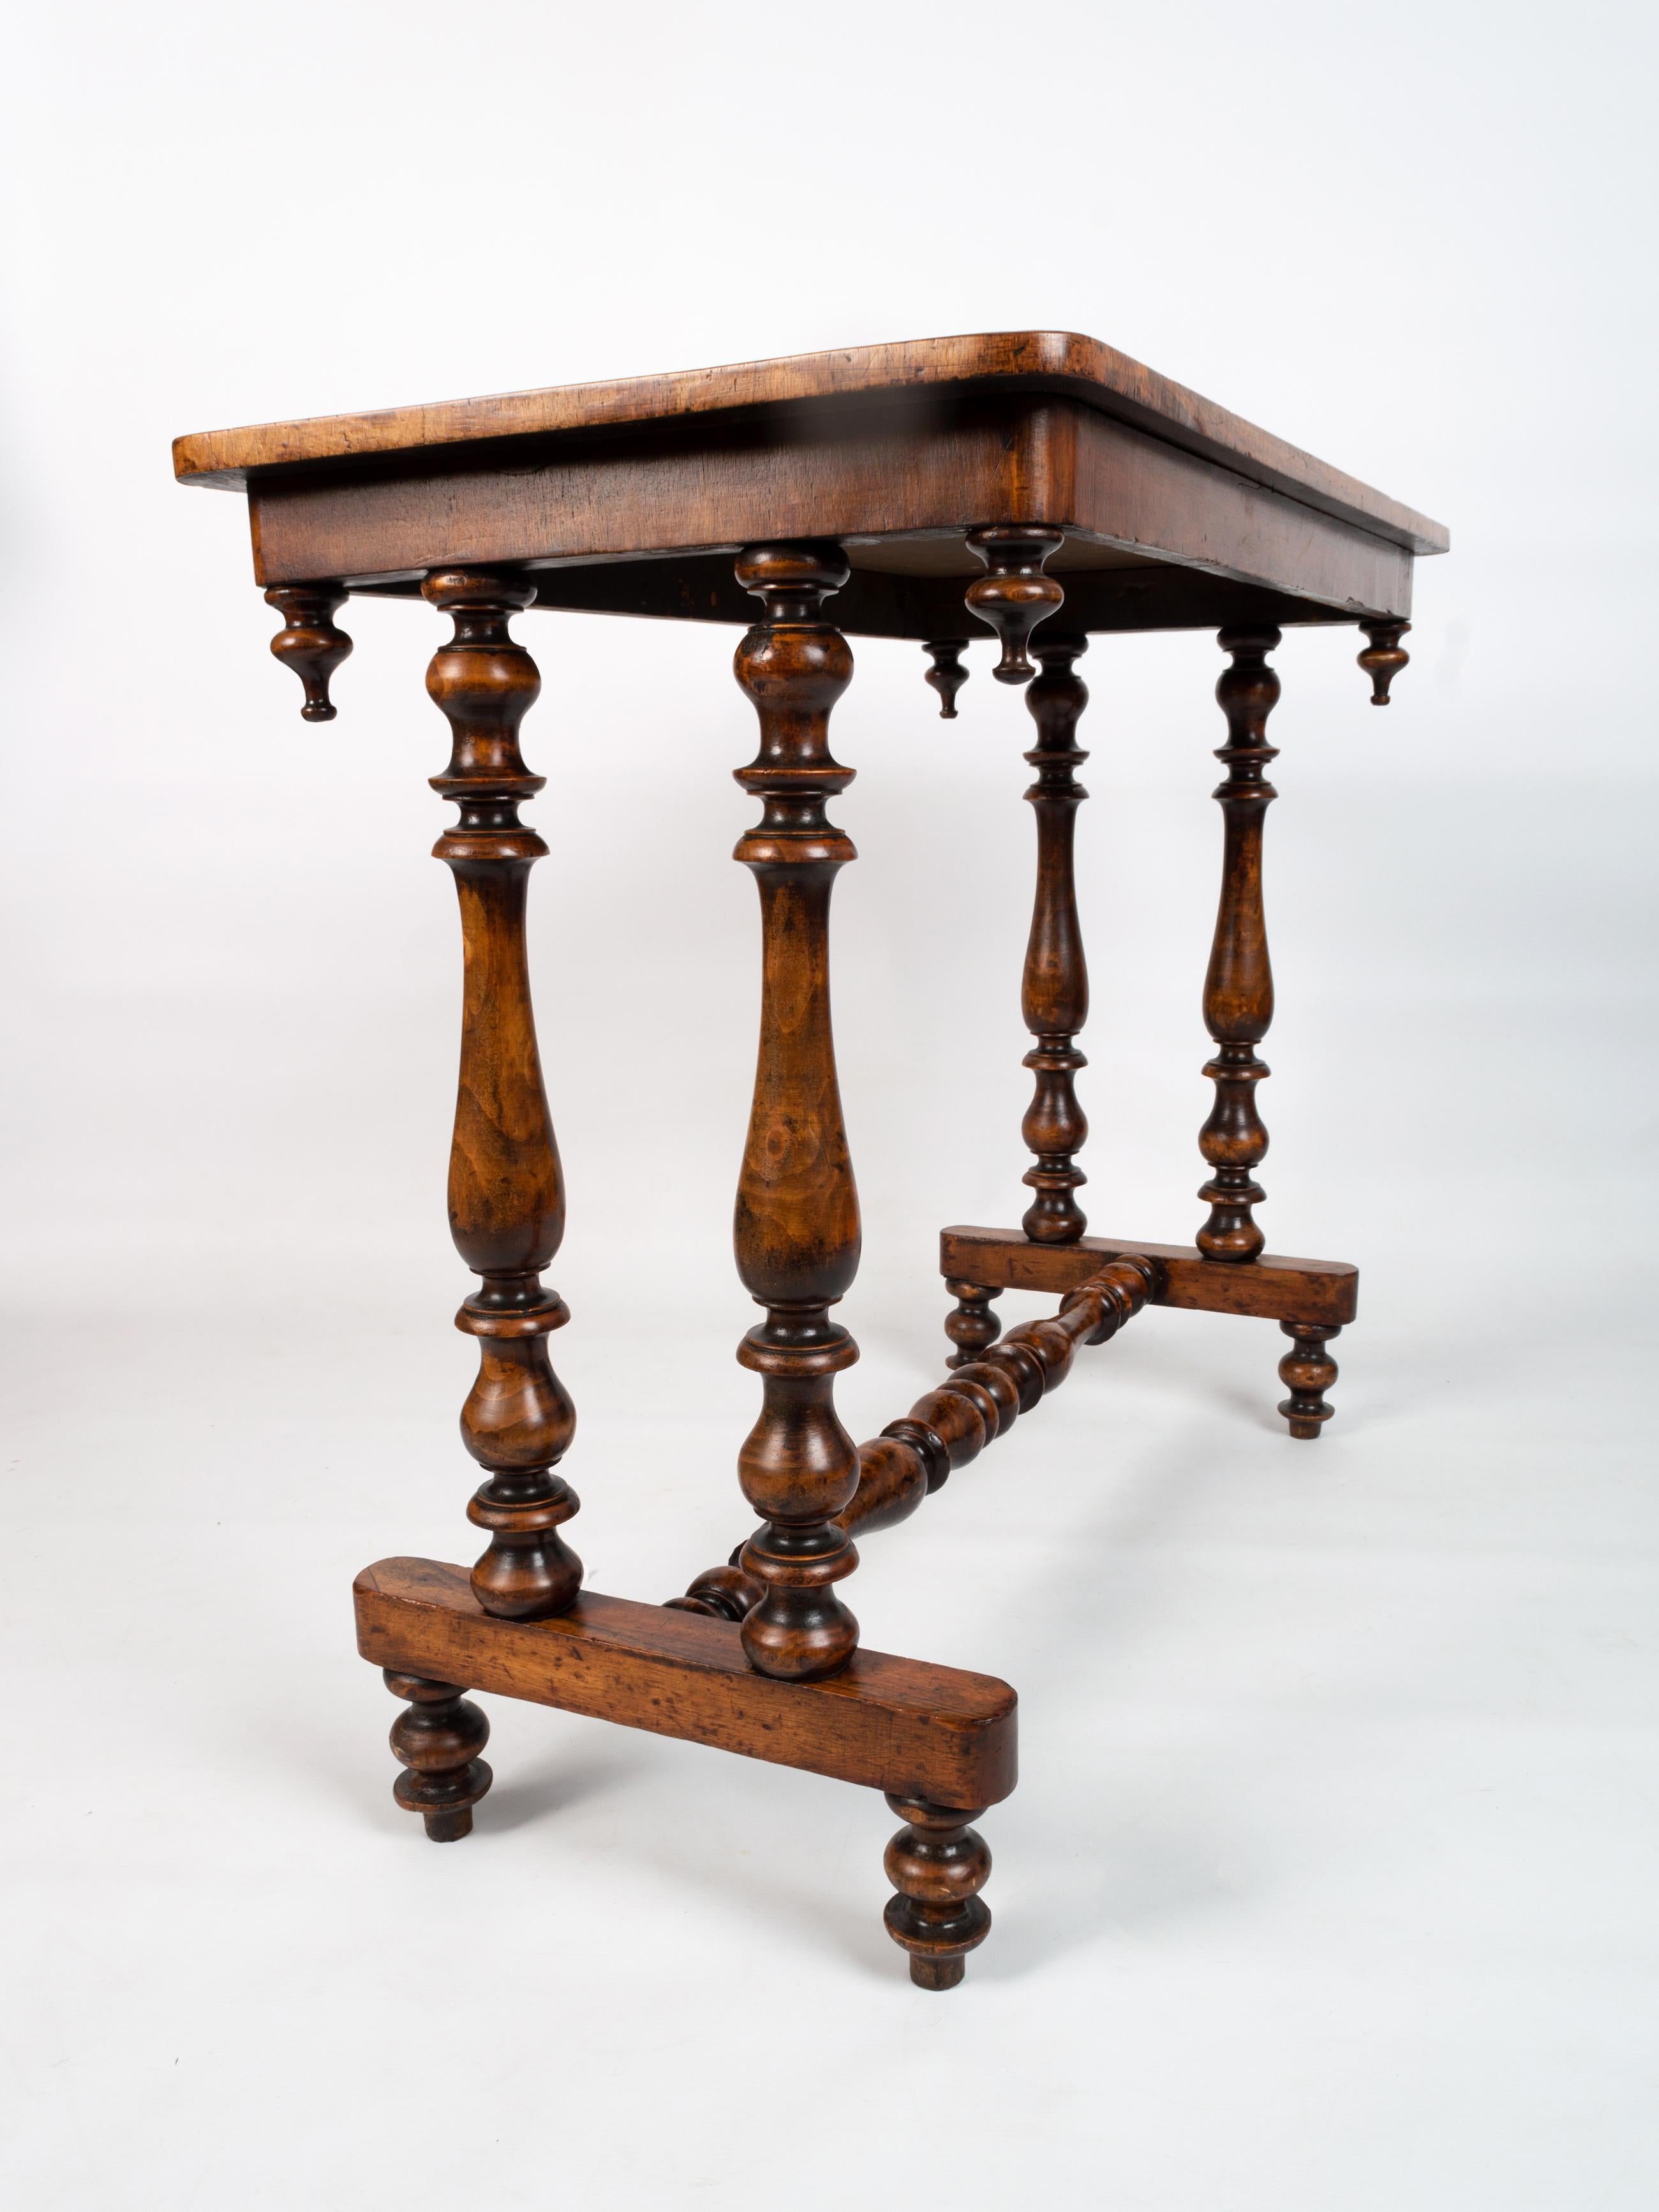 Antique English Edwardian Inlaid Walnut Hall Table Console C.1900 For Sale 6